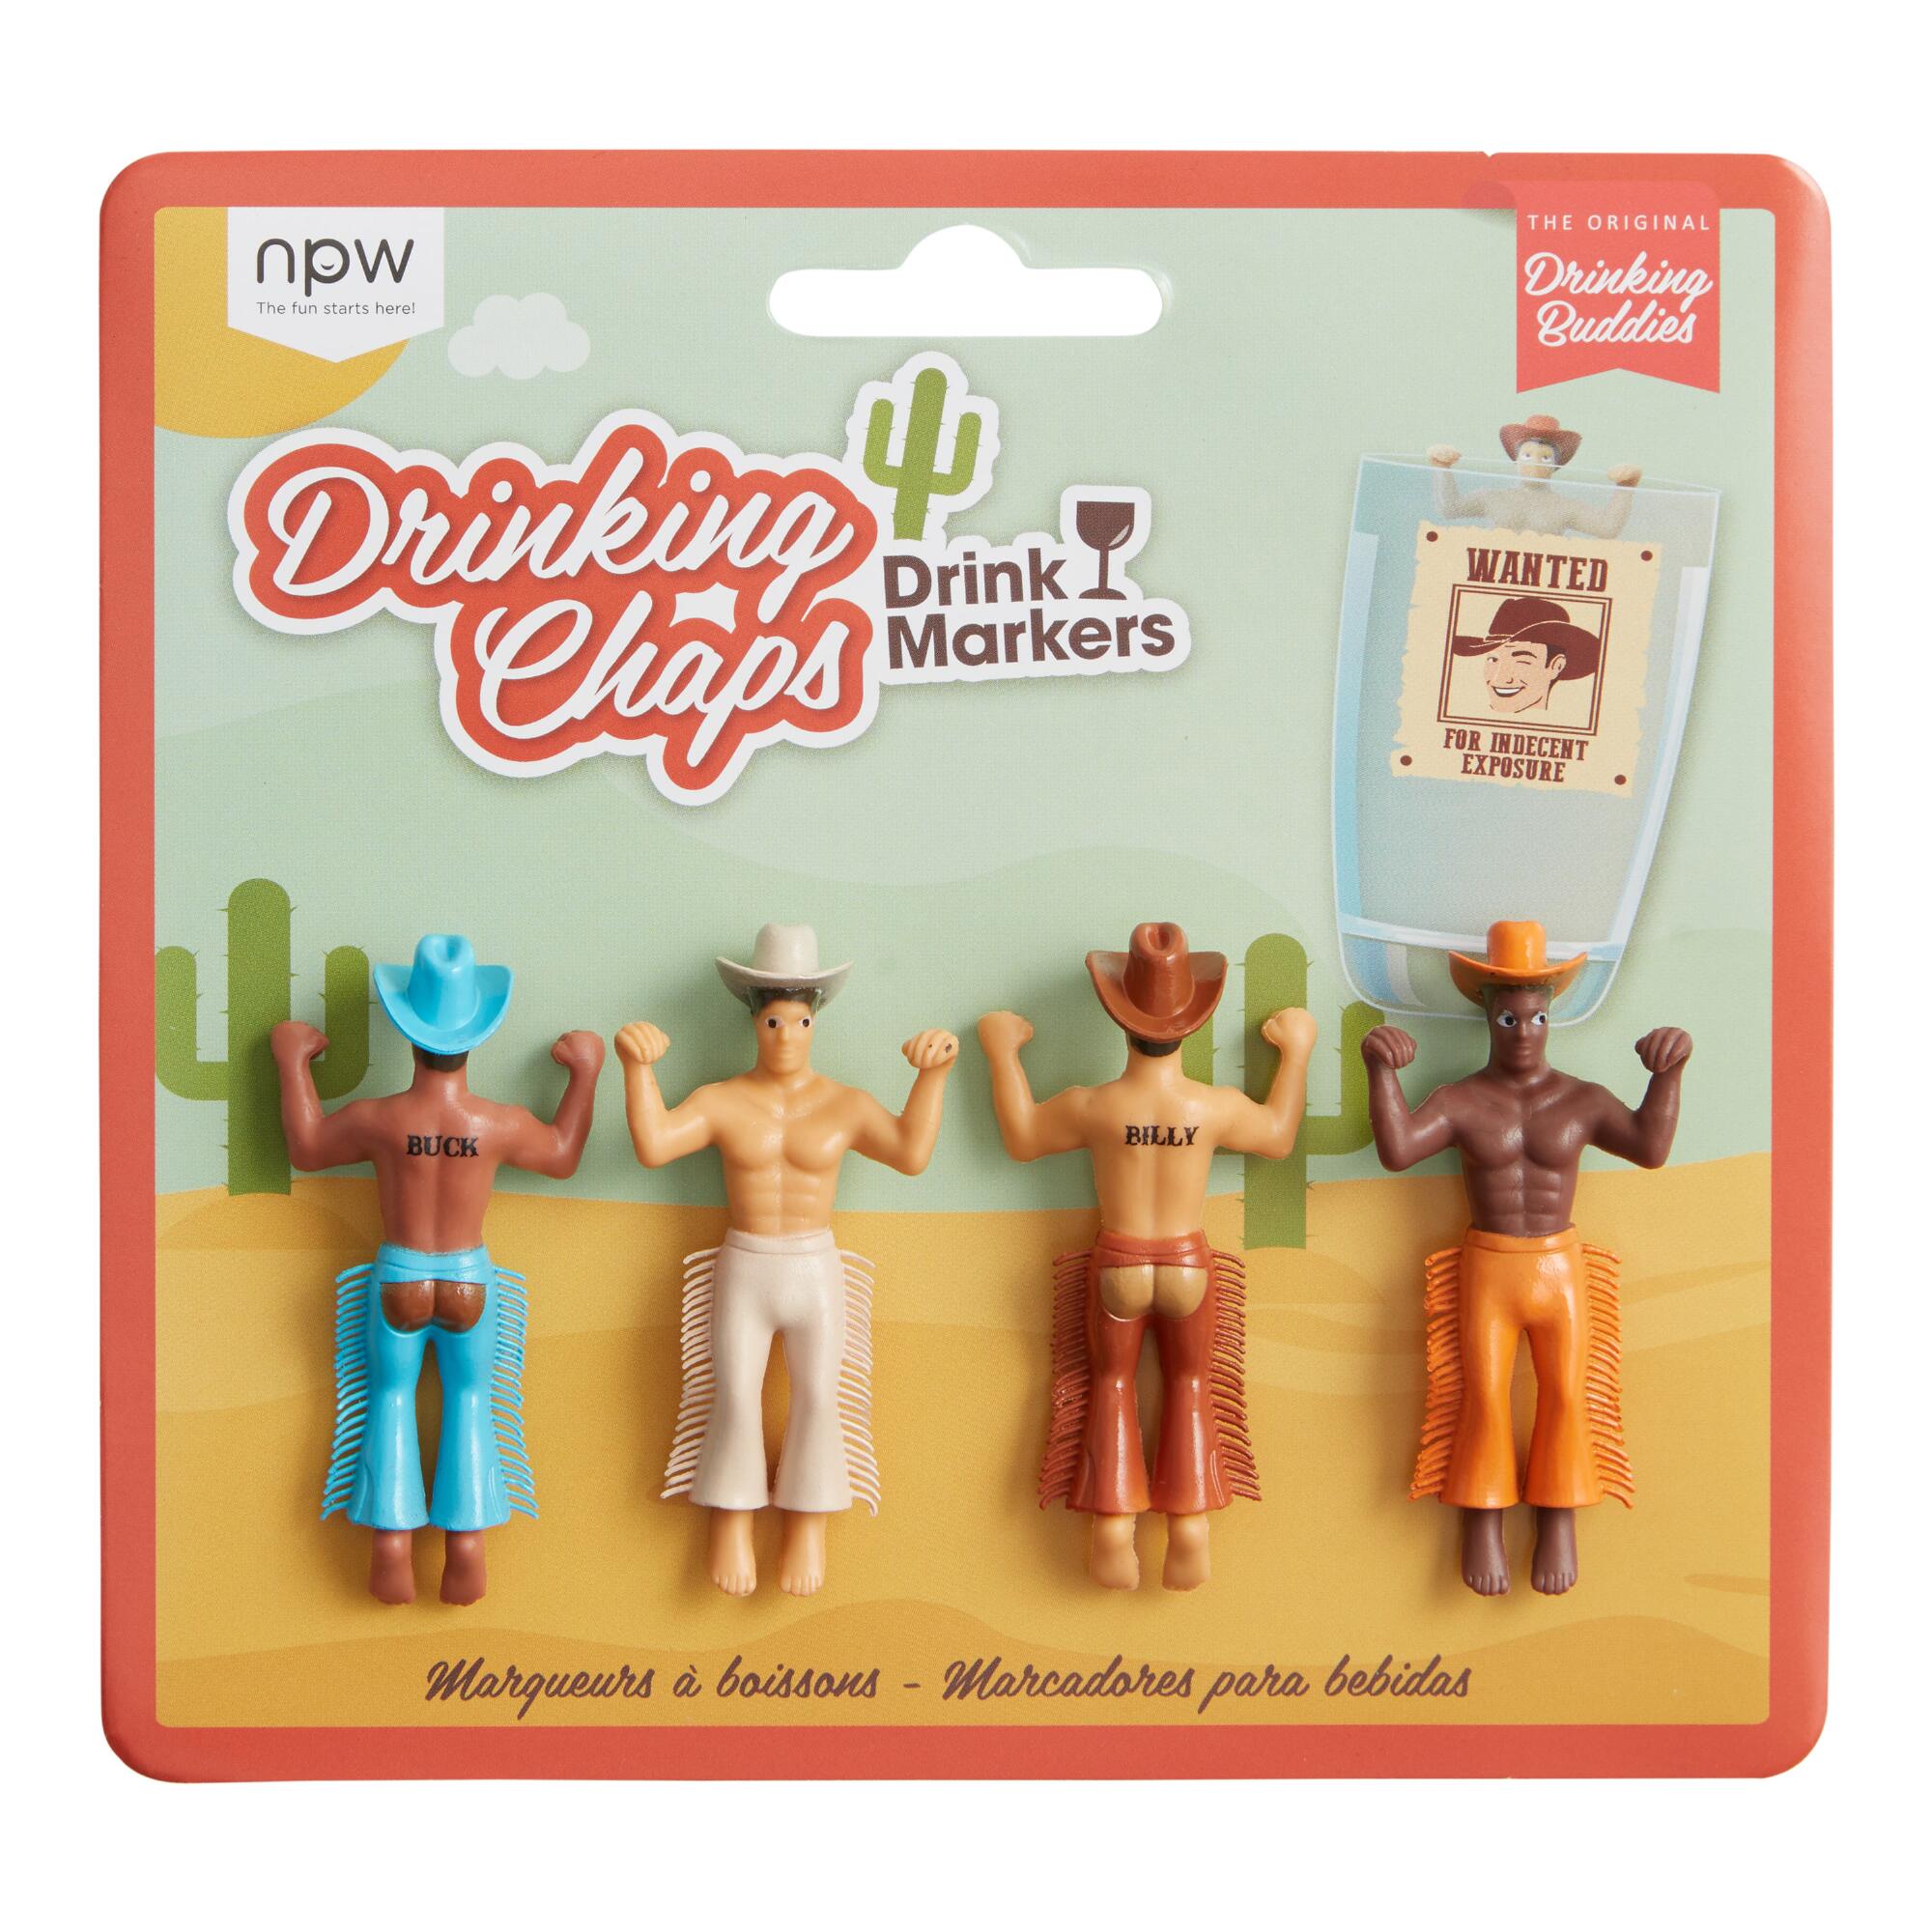 Drinking Chaps Glass Markers 4 Pack by World Market